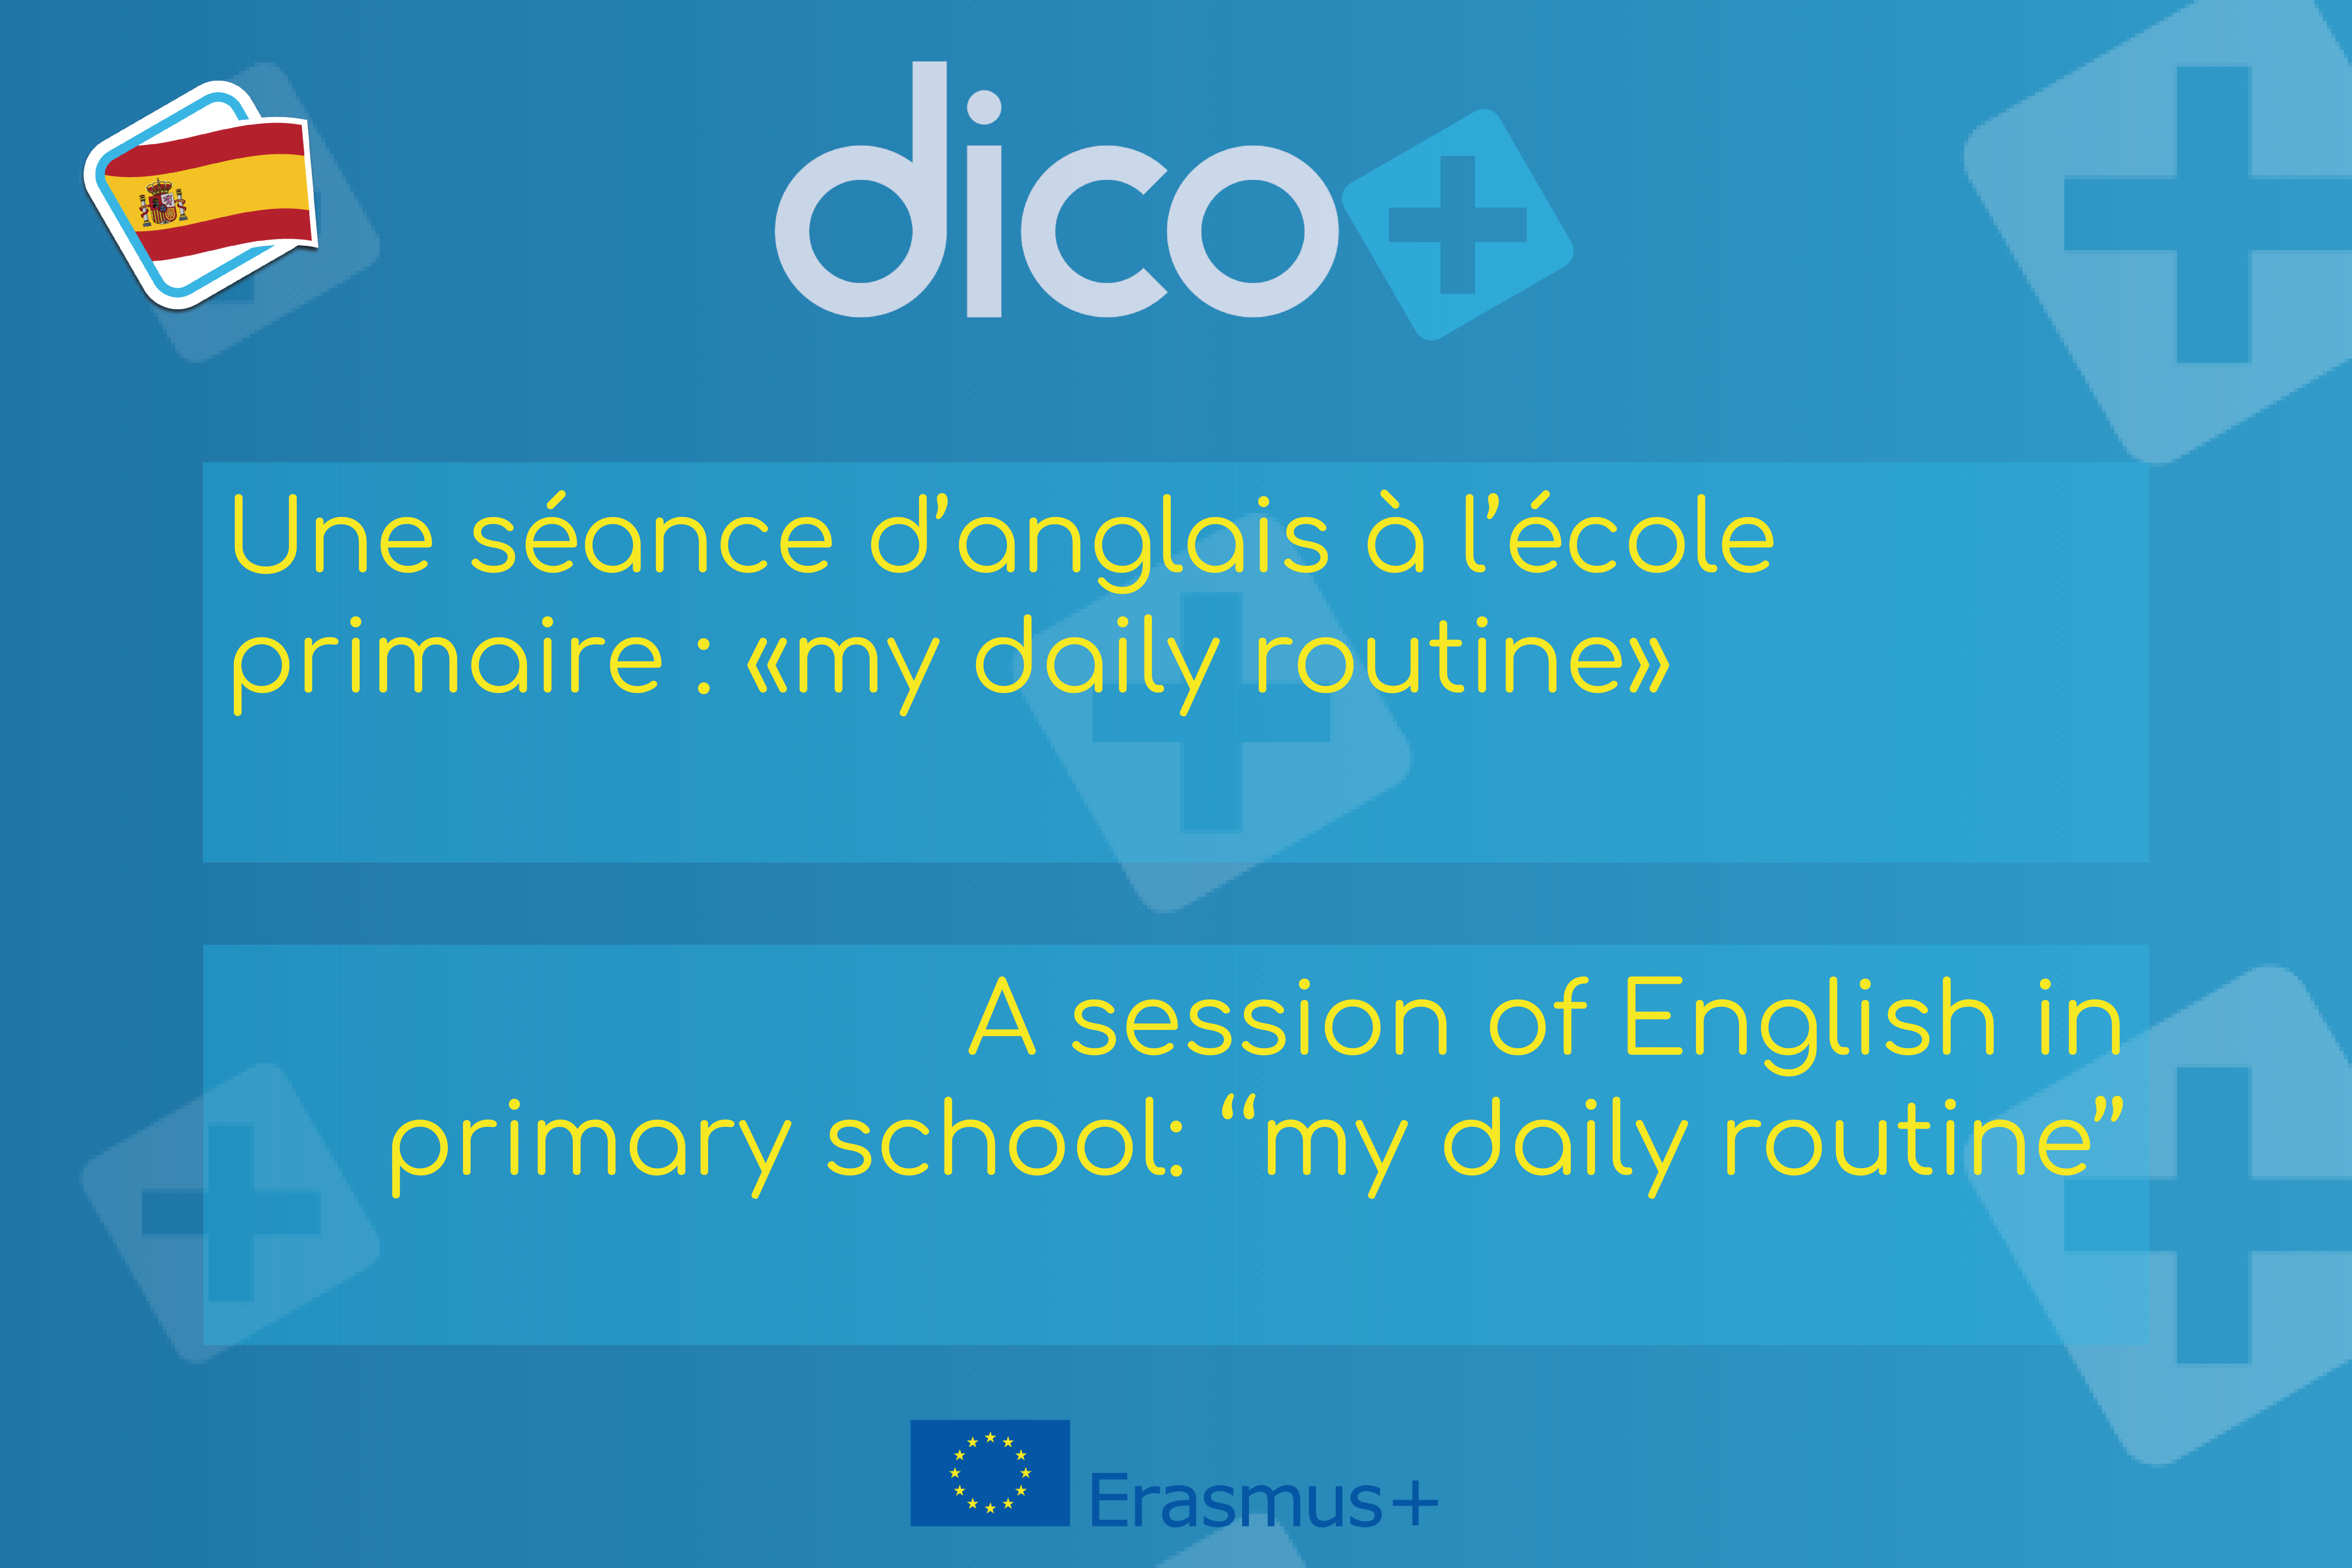 A session of English in primary school: my daily routine